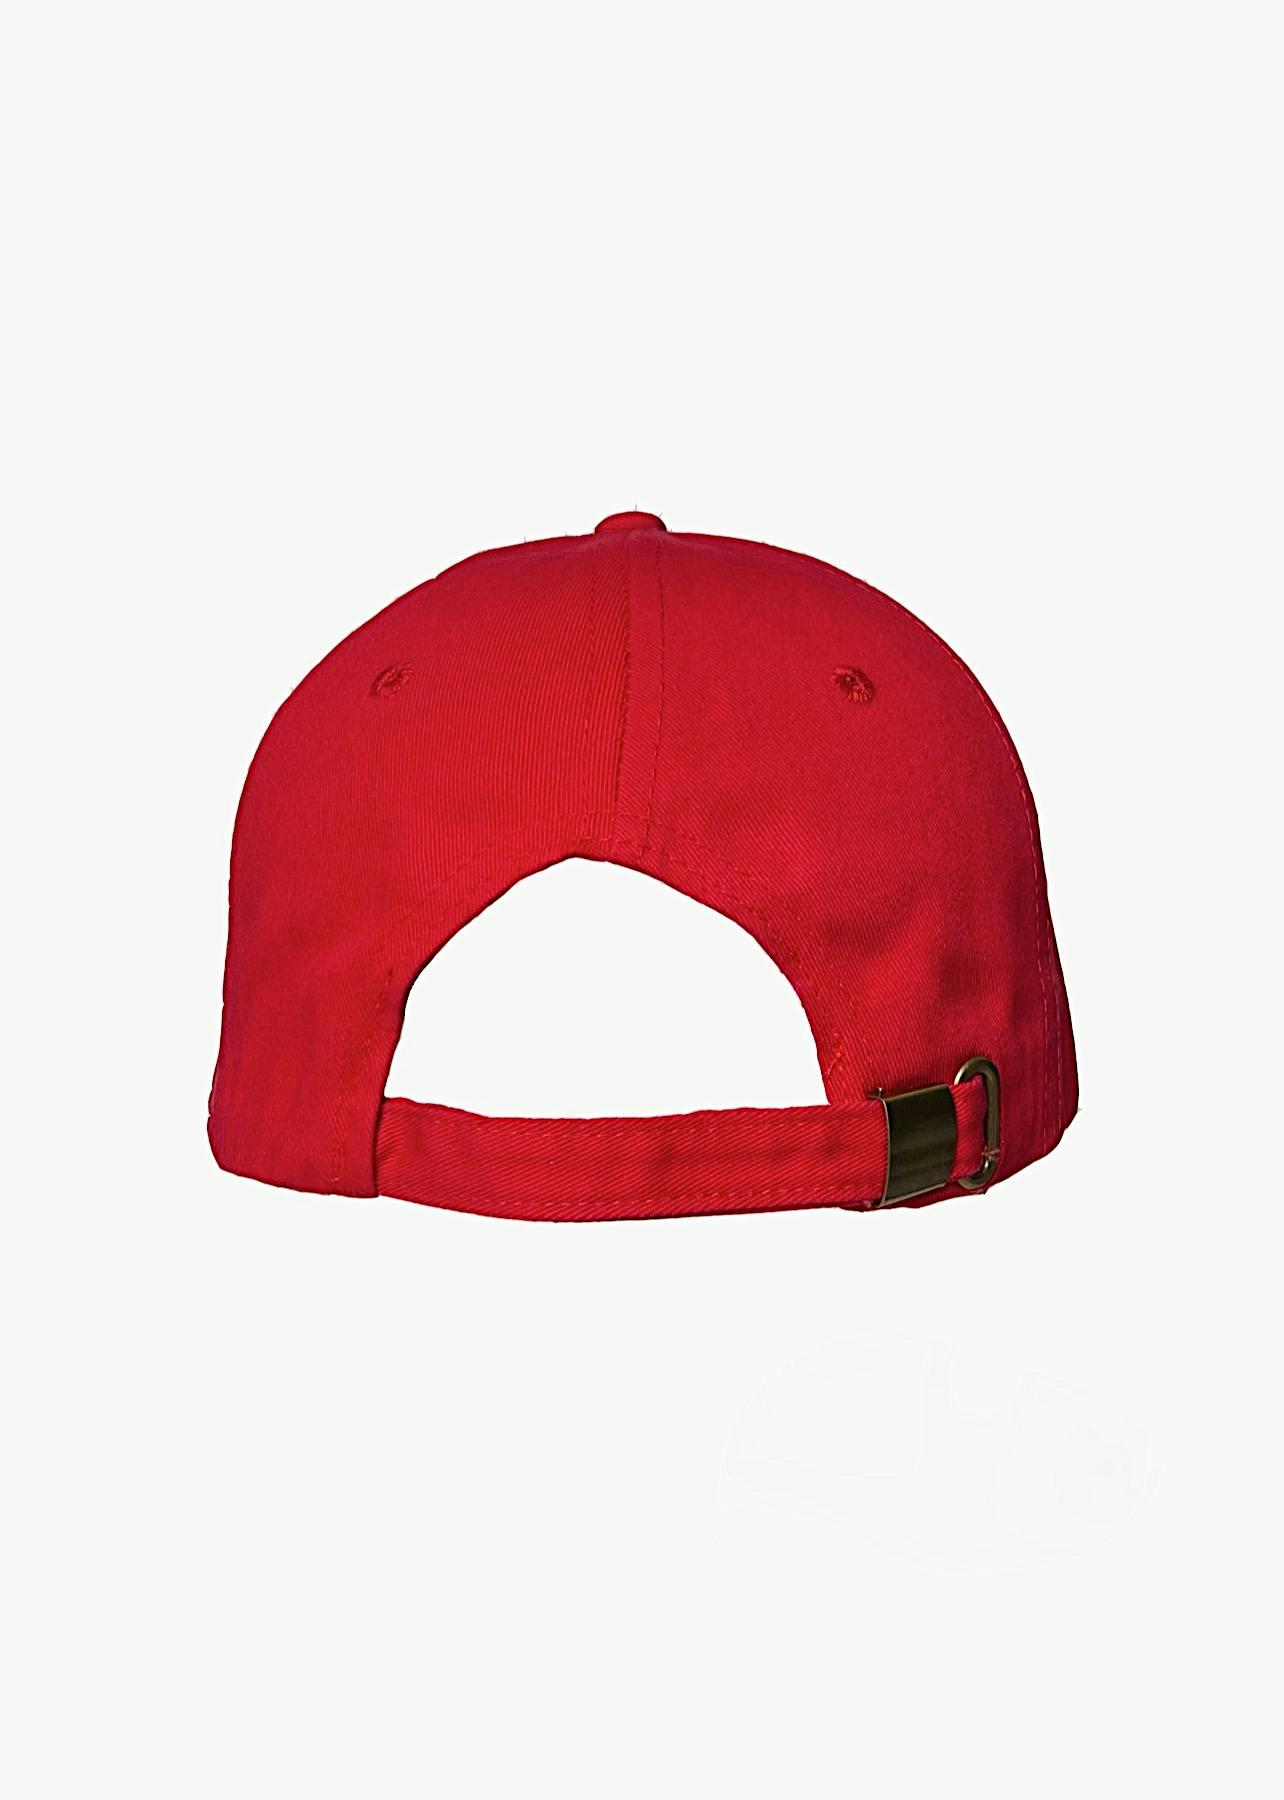 6 PANEL CHINO TWILL DAD CAP WITH BRASS BUCKLE CLOSURE